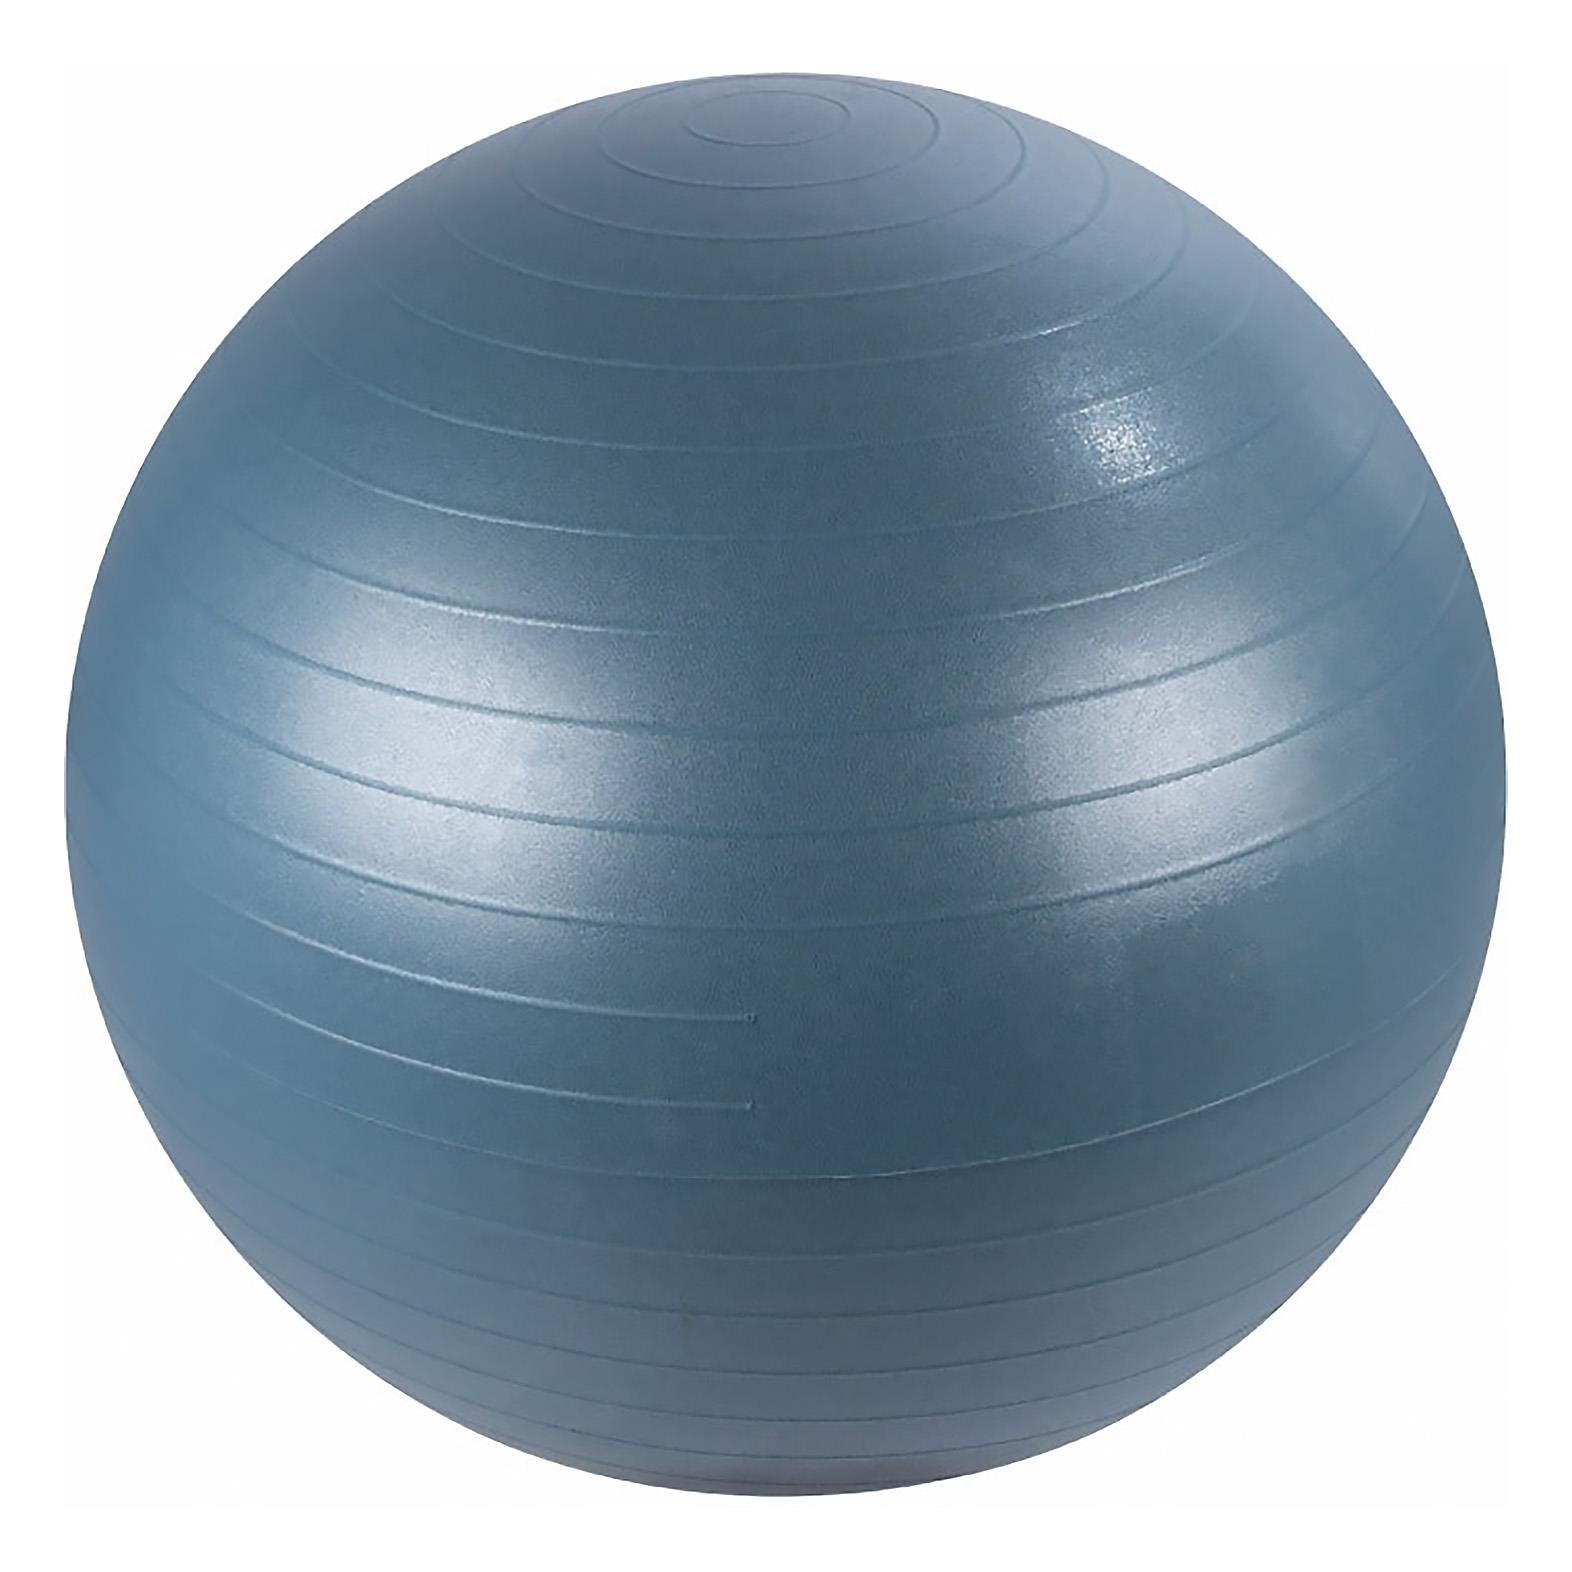 GEEZY Inflatable Fitness Ball Inflatable Exercise Ball